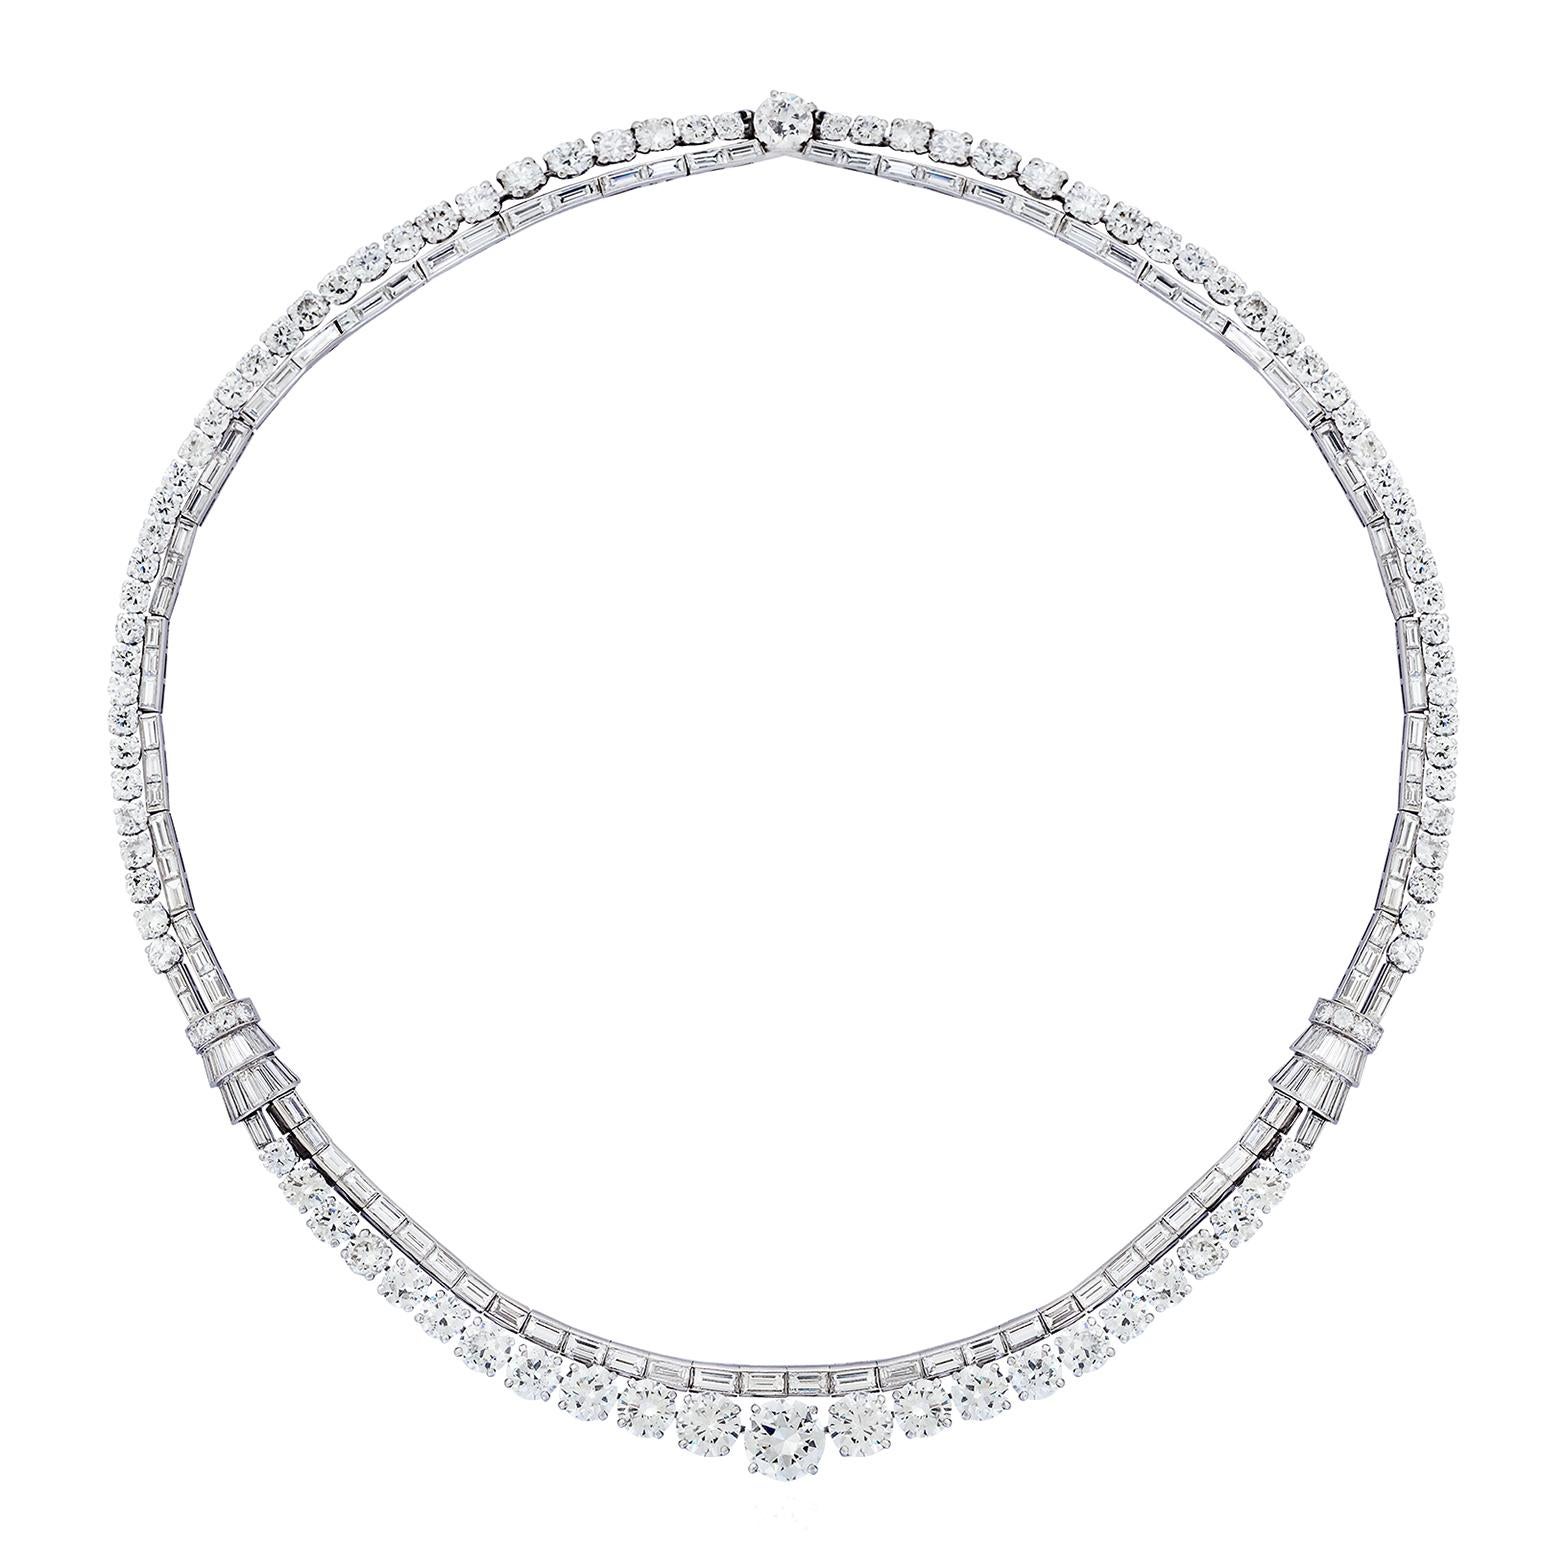 Platinum and 18-karat white gold necklace with baguette- and brilliant-cut diamonds. Weight of the central diamond: approx. 2.50 cts. Length: 39 cm. Grand weight: 65.59g.